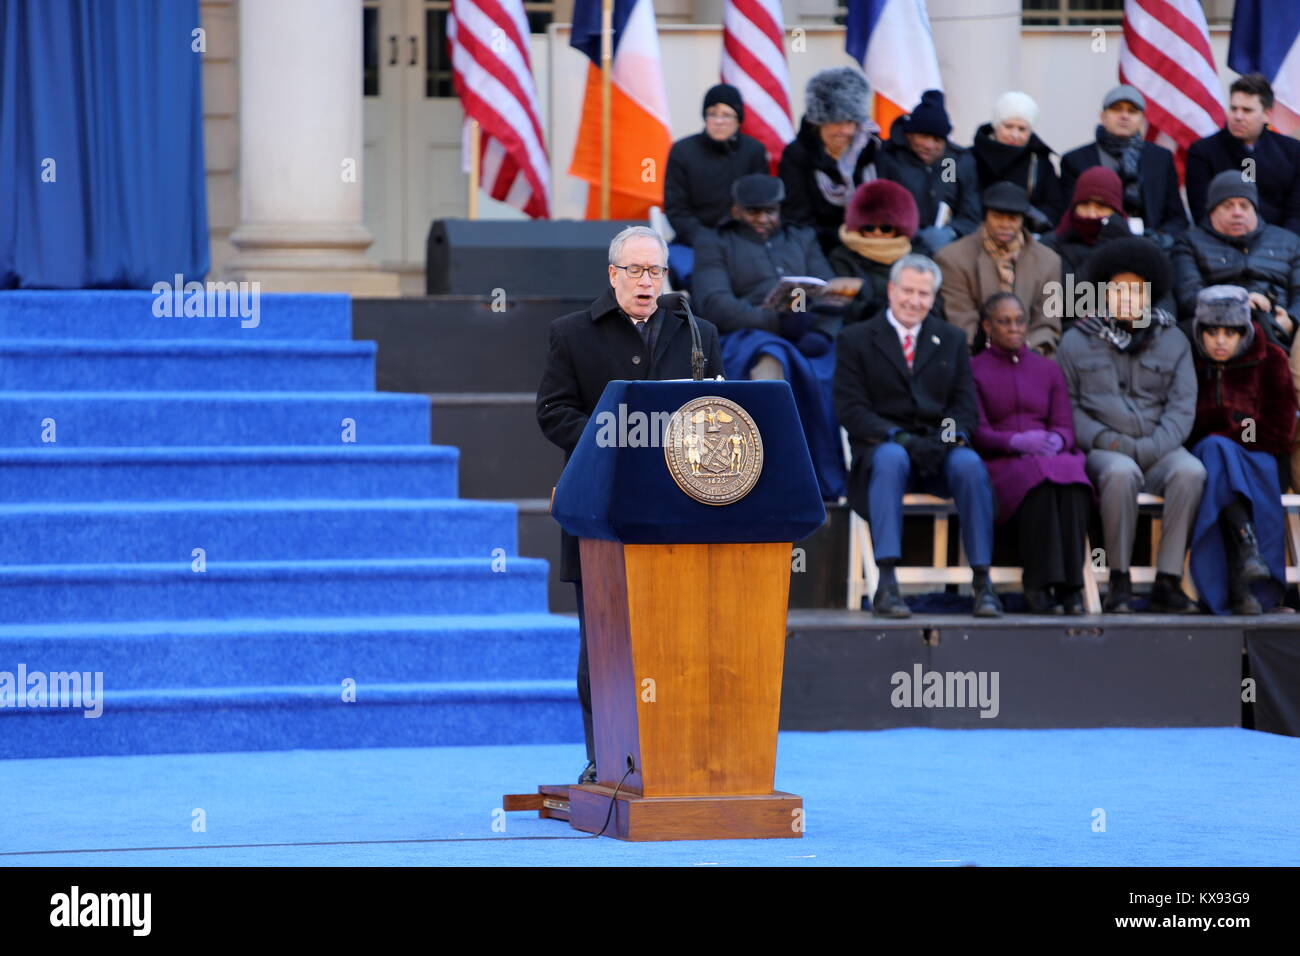 New Year 2018: Mayor De Blasio Sworn In For Second Term At City Hall Ceremony Stock Photo